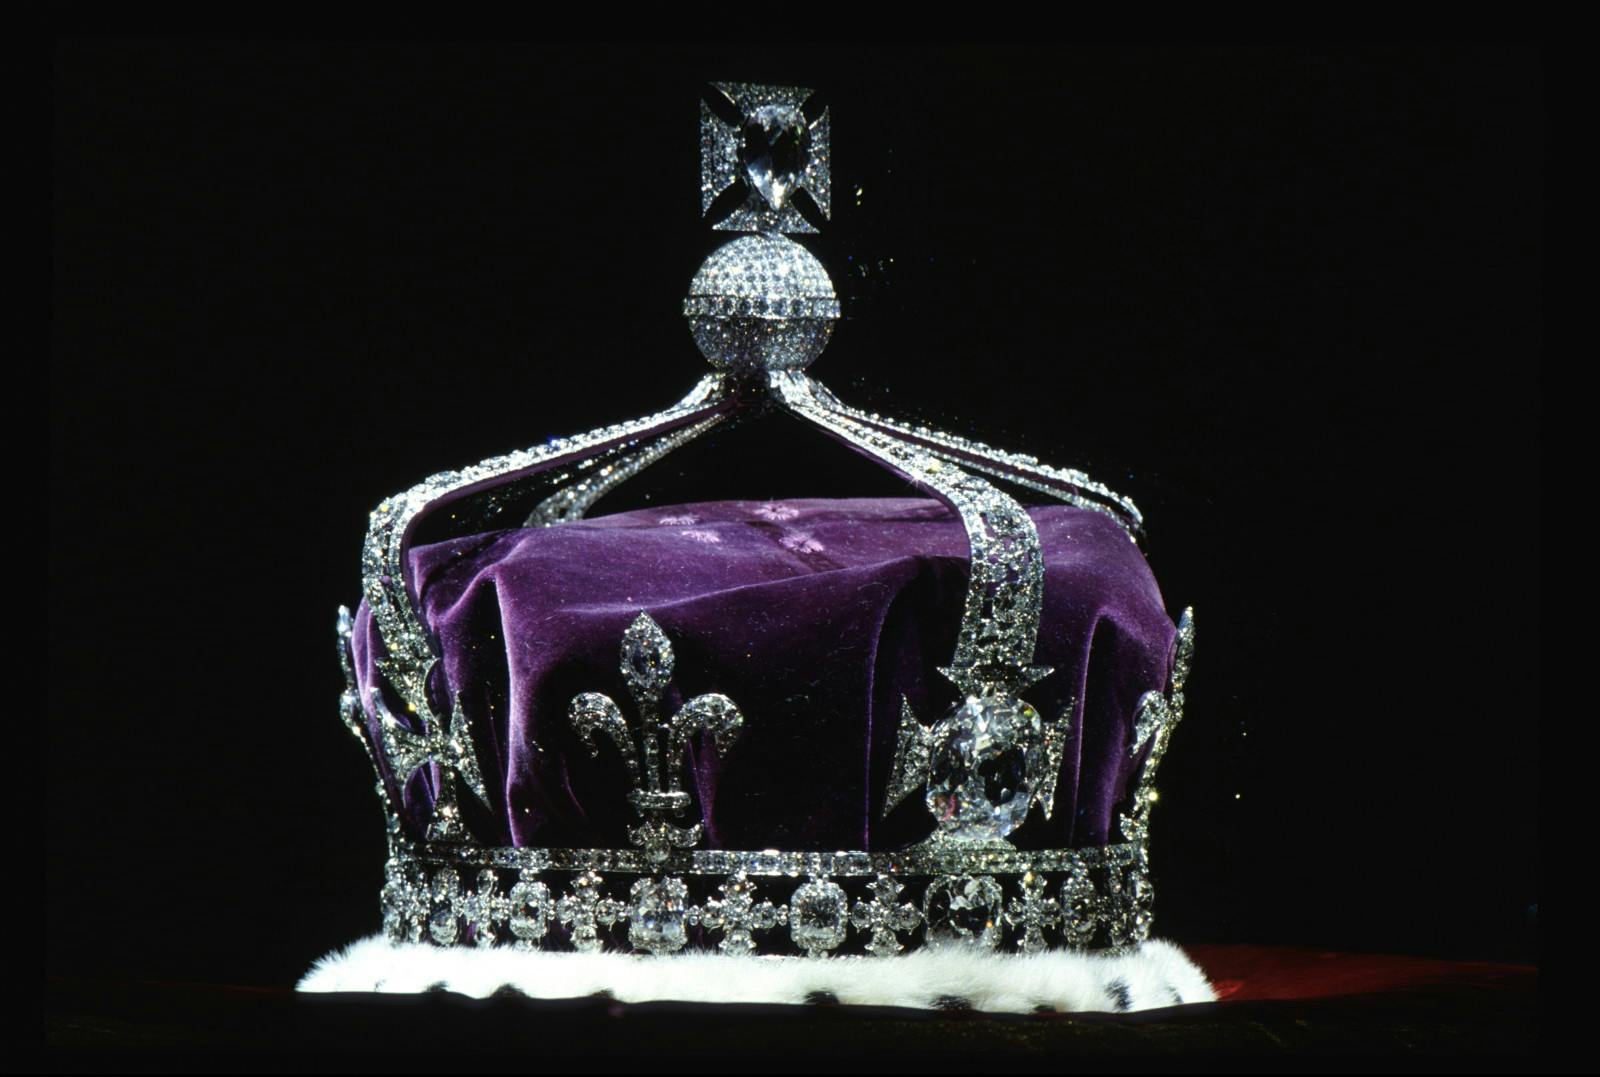 The Crown Of Queen Elizabeth The Queen Mother (1937) made of platinum and containing the famous Koh-i-noor diamond. (Tim Graham/Getty Images)  